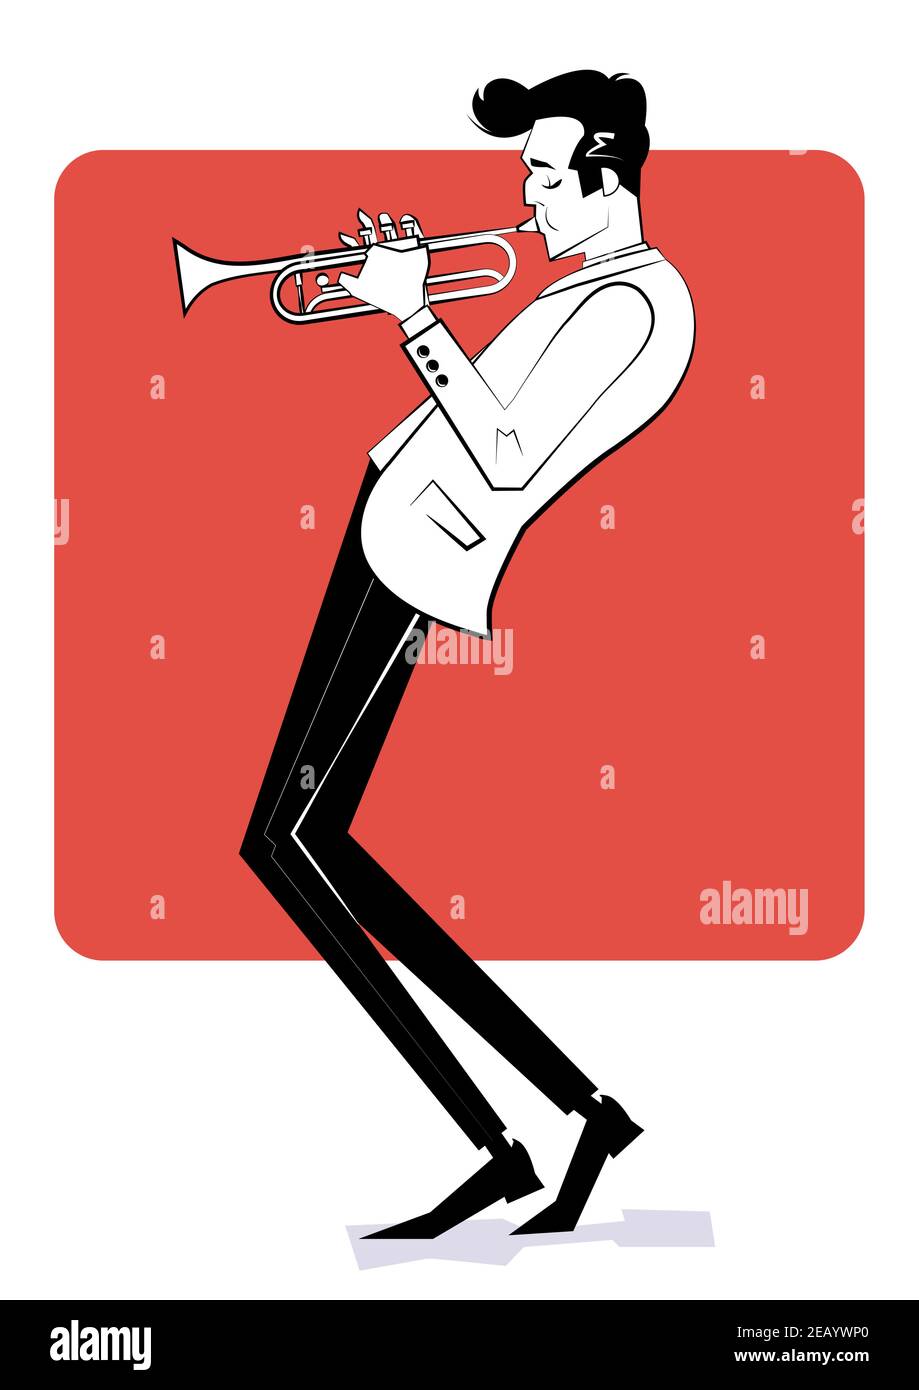 Concept for jazz poster. Man playing trumpet on red background. Sketch style illustration. Stock Vector